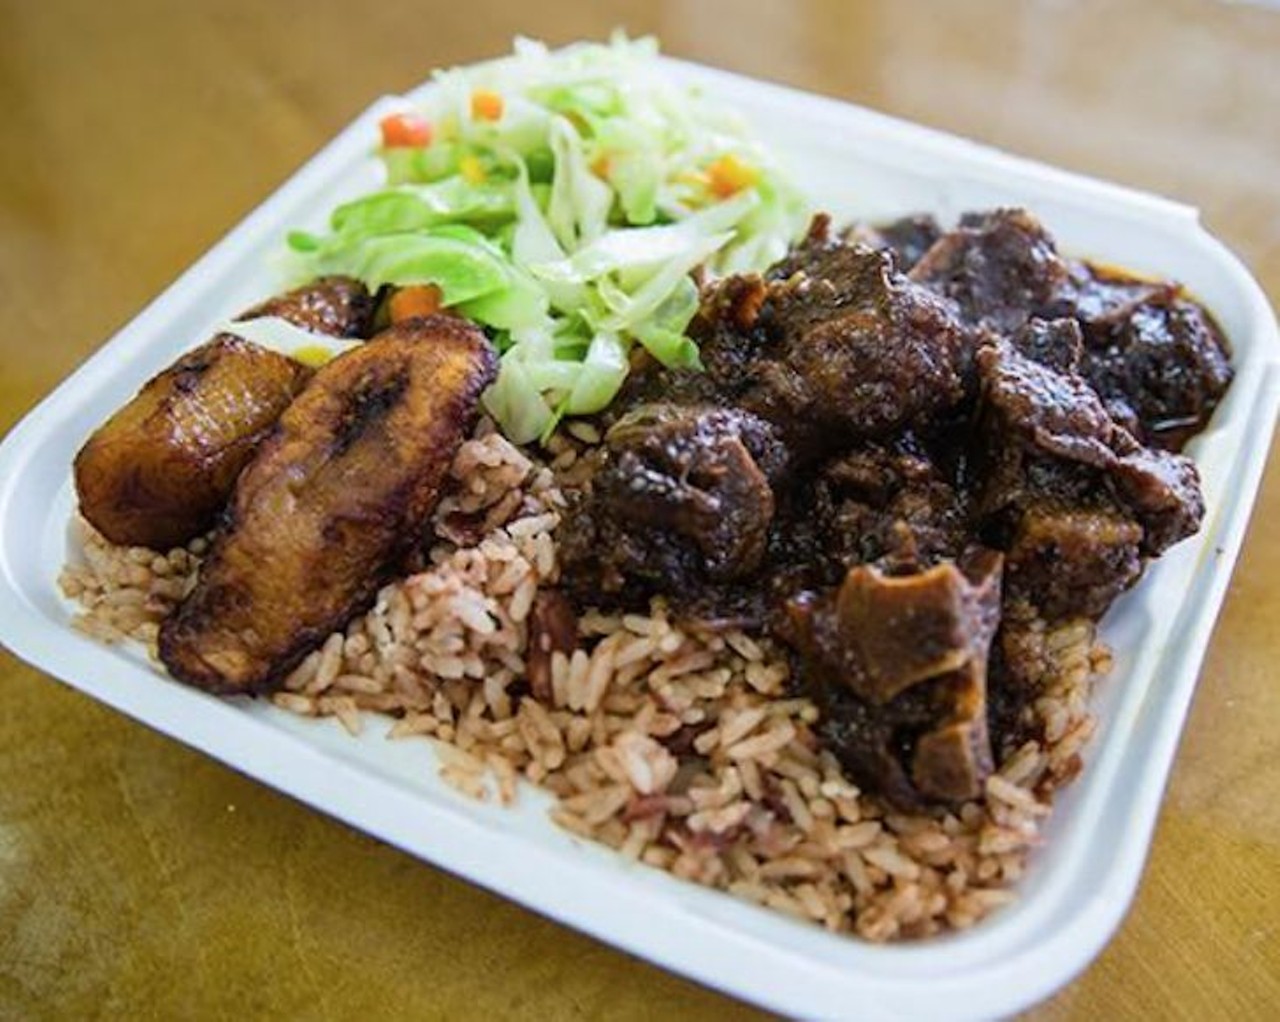 Miller&#146;s Jamaican Cuisine
6854 Forest City Rd, Orlando, 32810 (407) 776-9271
This Jamaican spot goes all the way with lunch boxes packed with authentic flavors like jerk chicken and seasoned rice. Miller&#146;s kicked off its operations in May and has become a local favorite for Jamaican cuisine. 
Photo via Miller&#146;s Jamaican Cuisine/Facebook